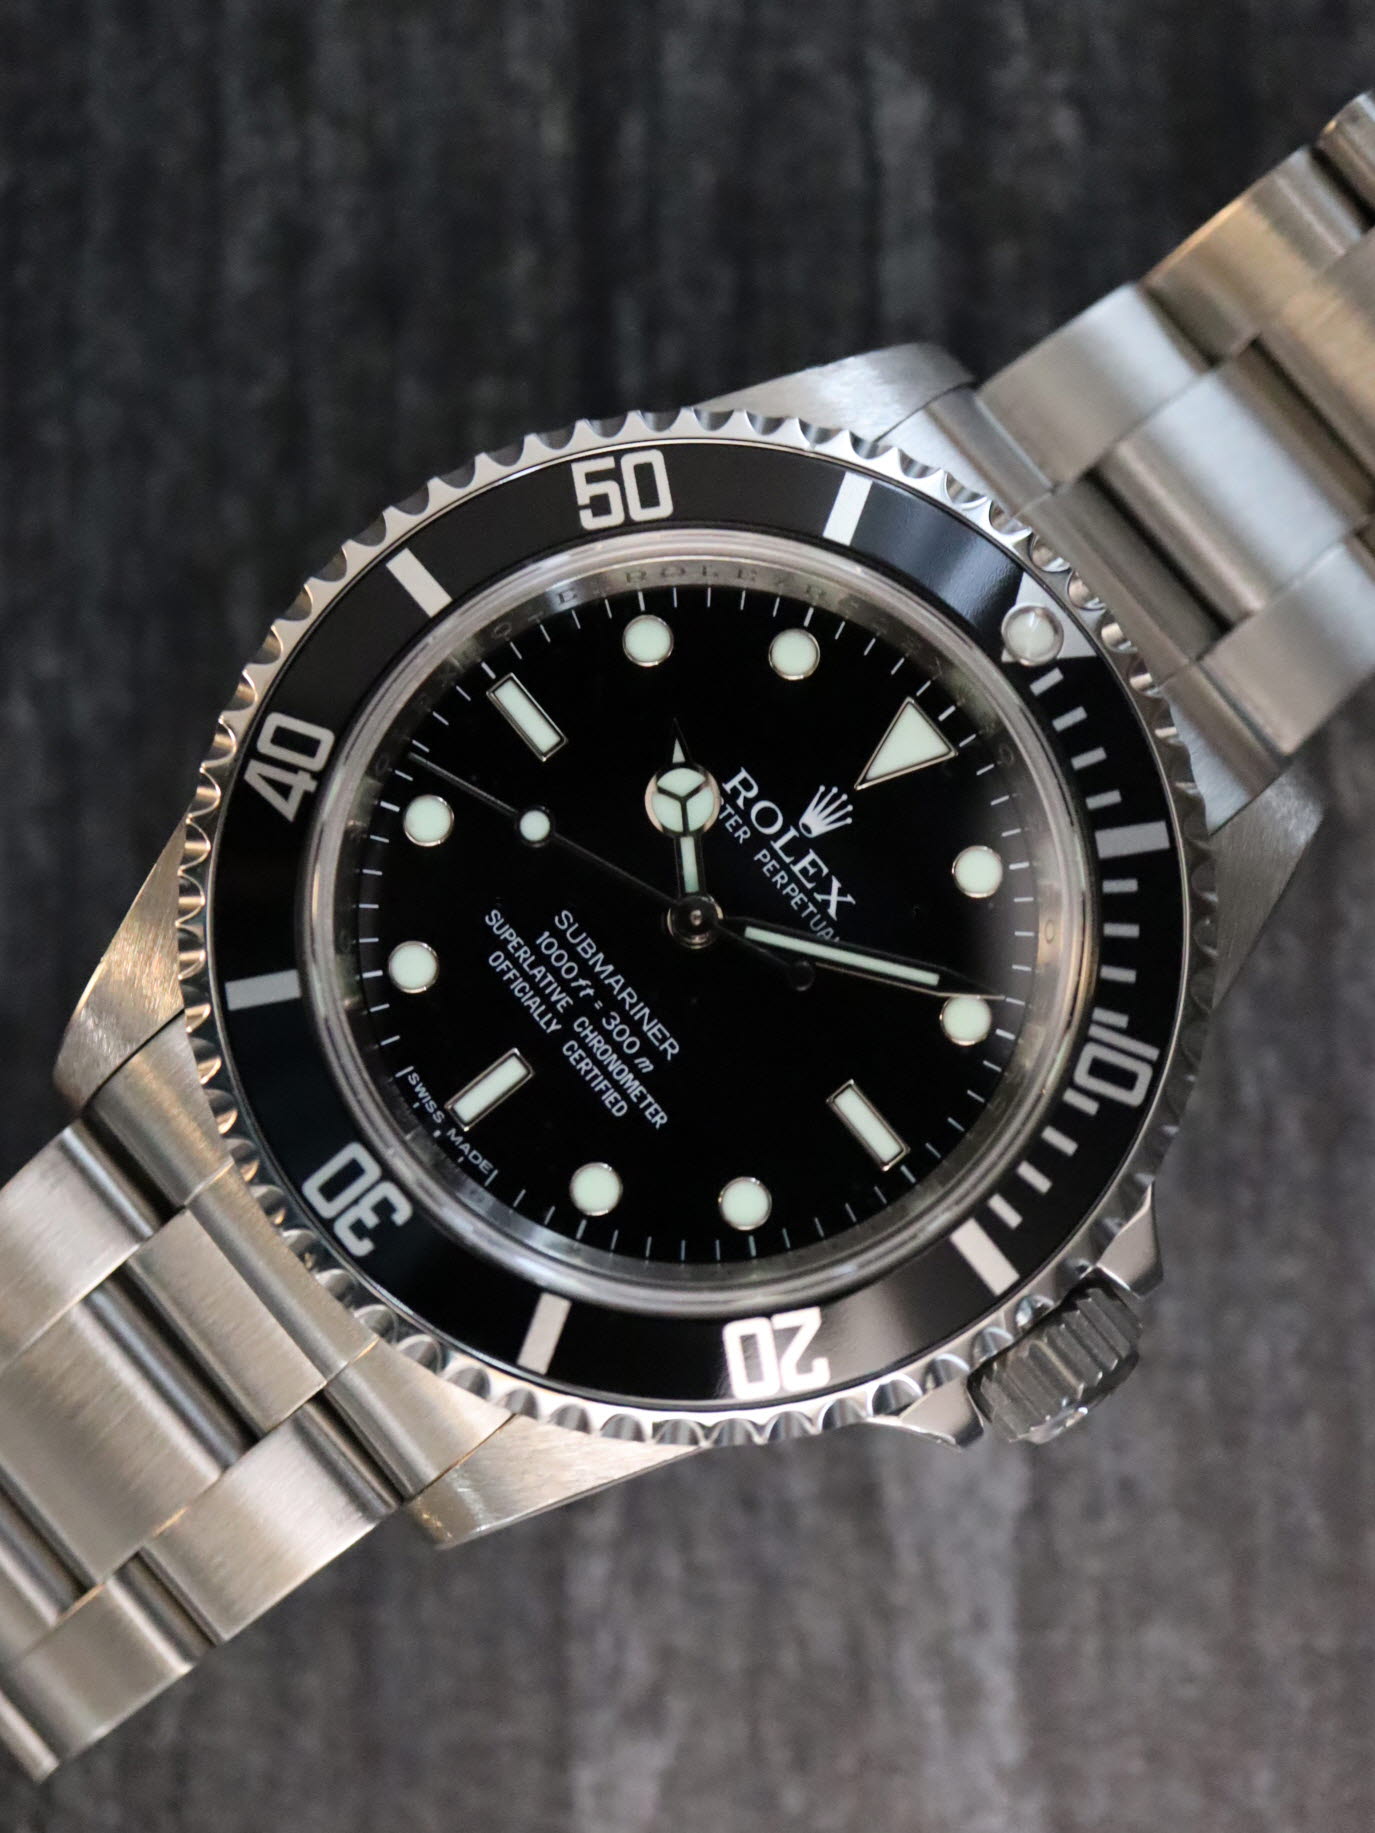 38434: Rolex Submariner "No Ref. 14060M, Box and 2010 Card – Paul Watches